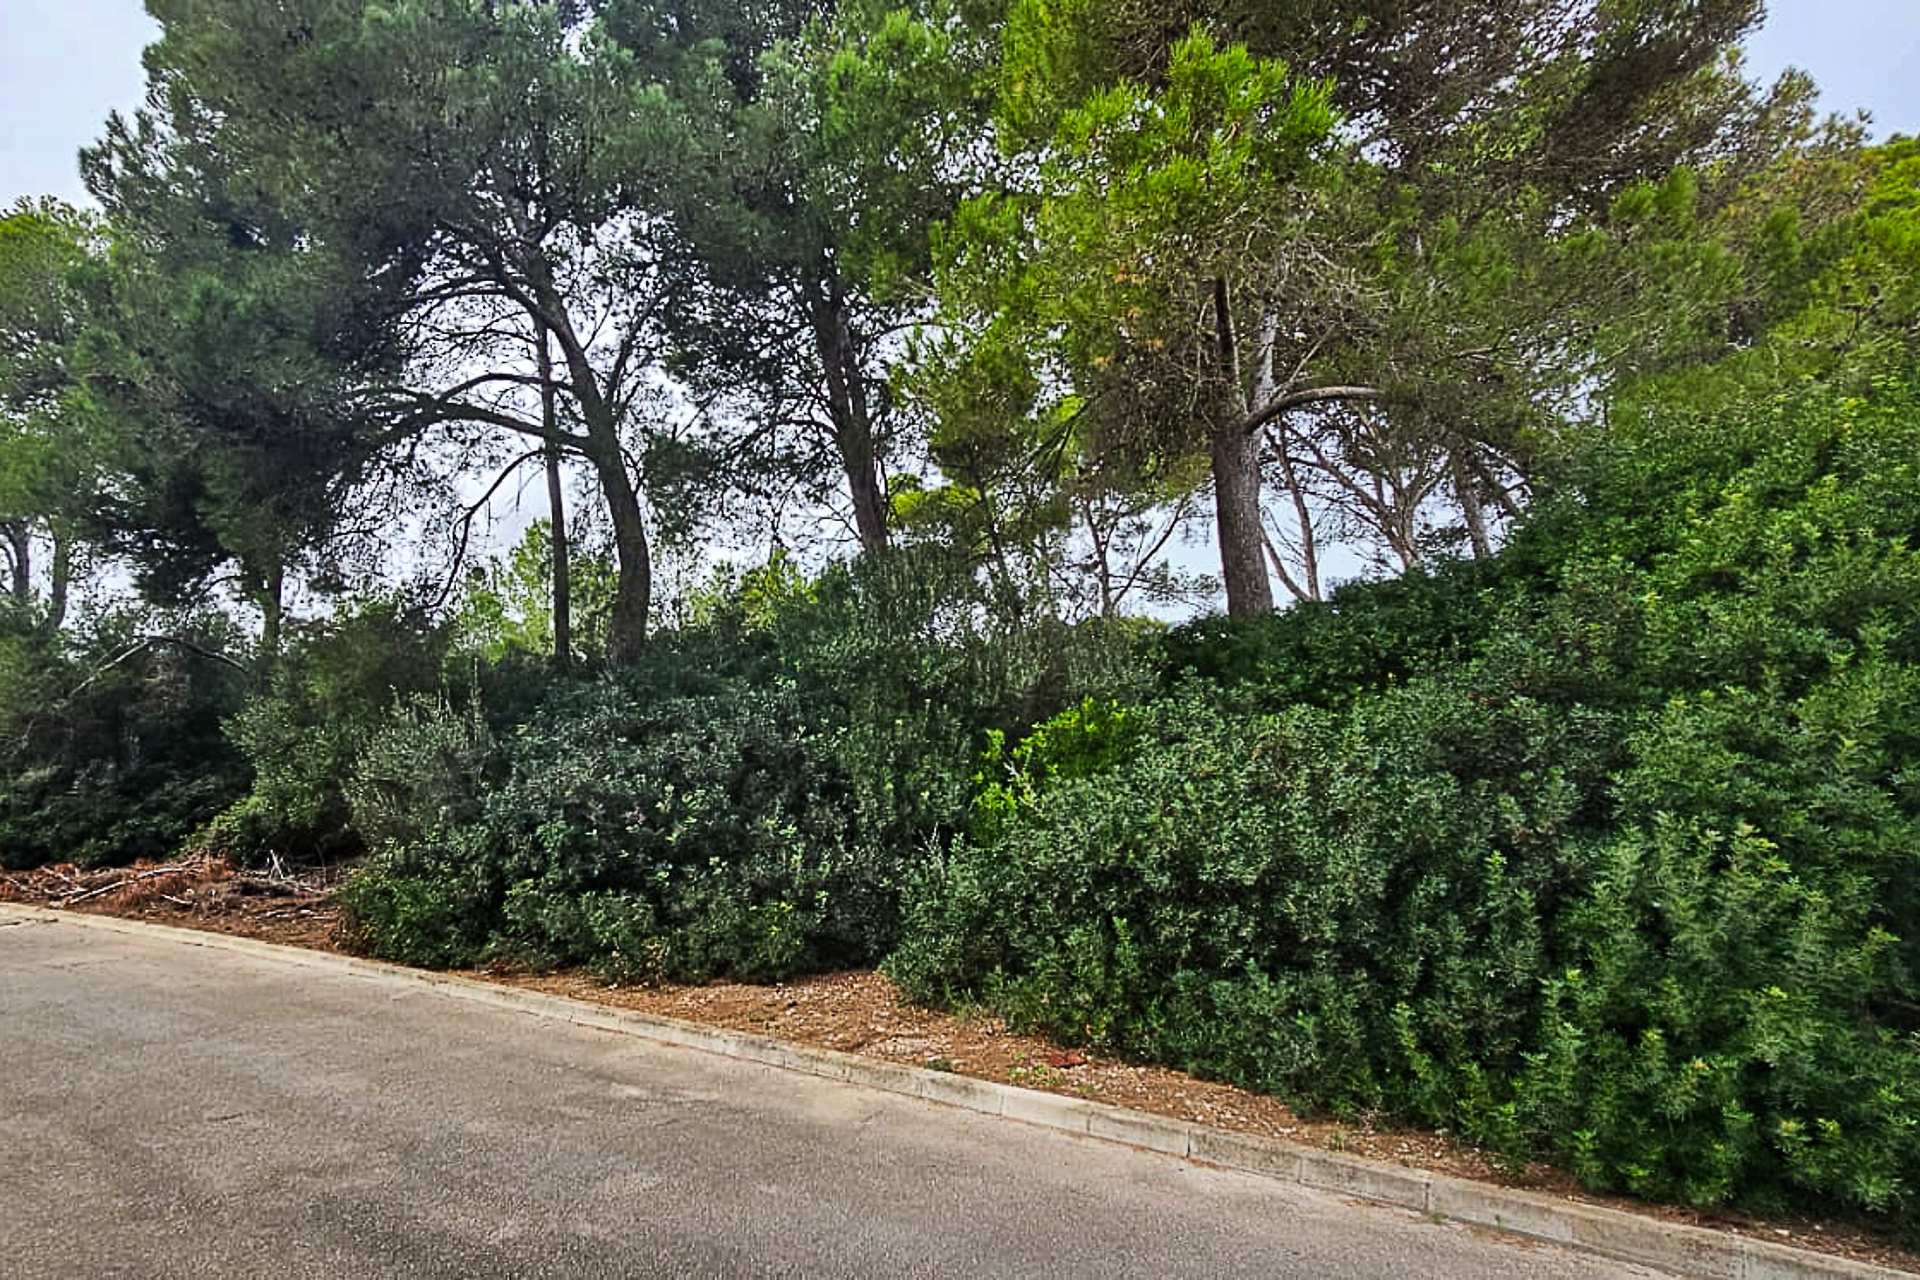 Exclusive plot in Porto Cristo: close to the coast, tranquillity and a first-class neighborhood, 07680 Manacor (Spain), Residential plot